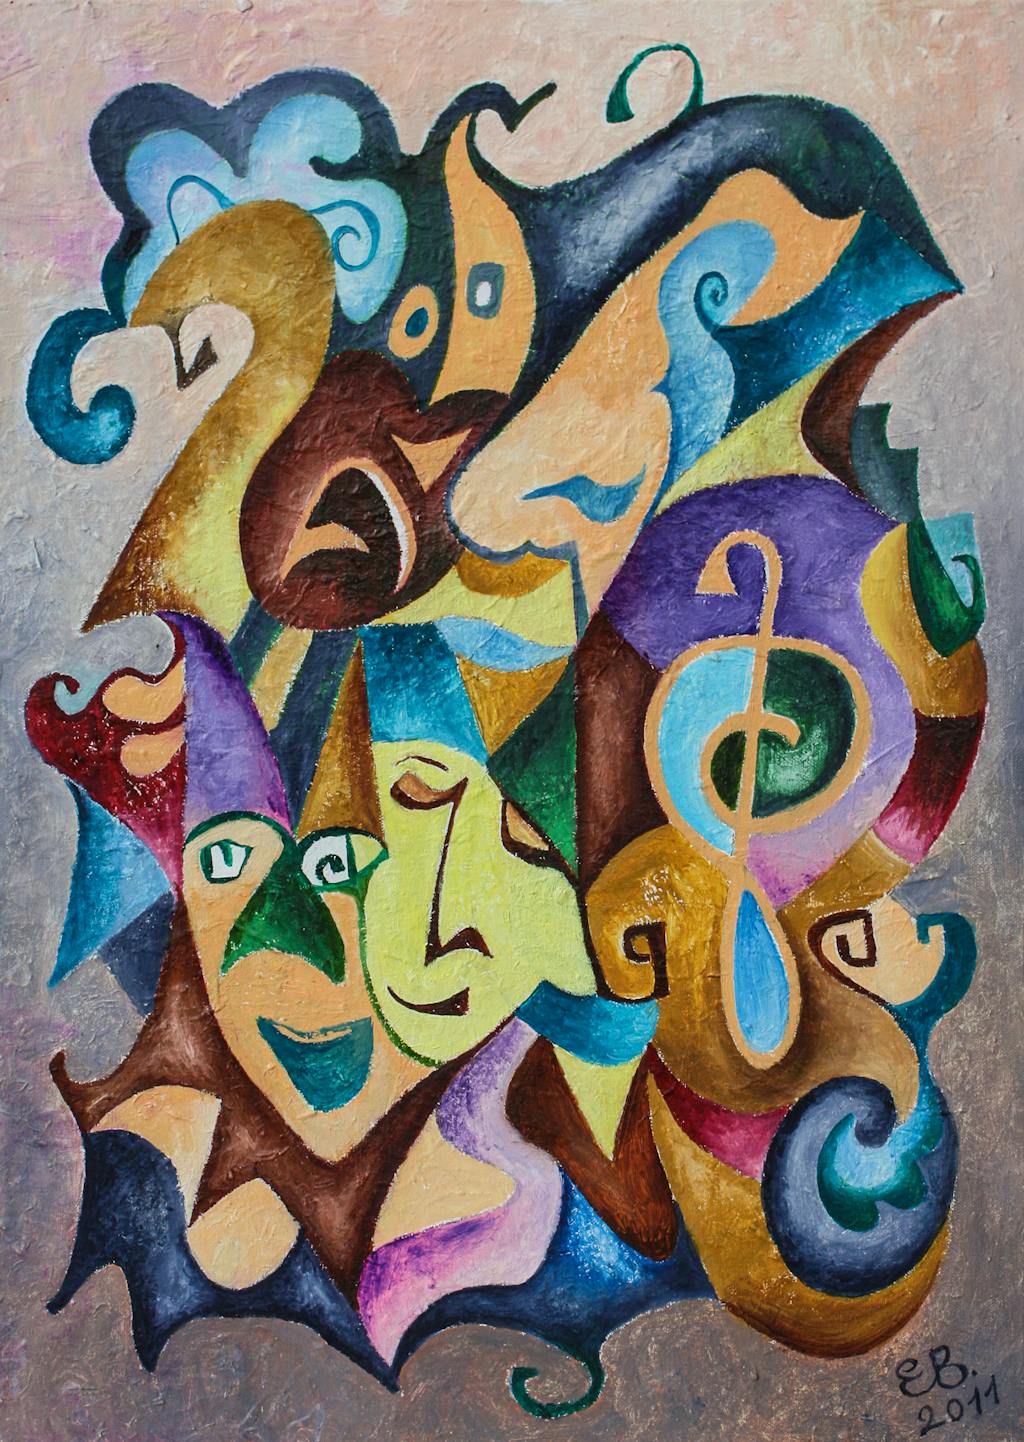 Painting "Rondo", painted by Elena Birkenwald in 2011